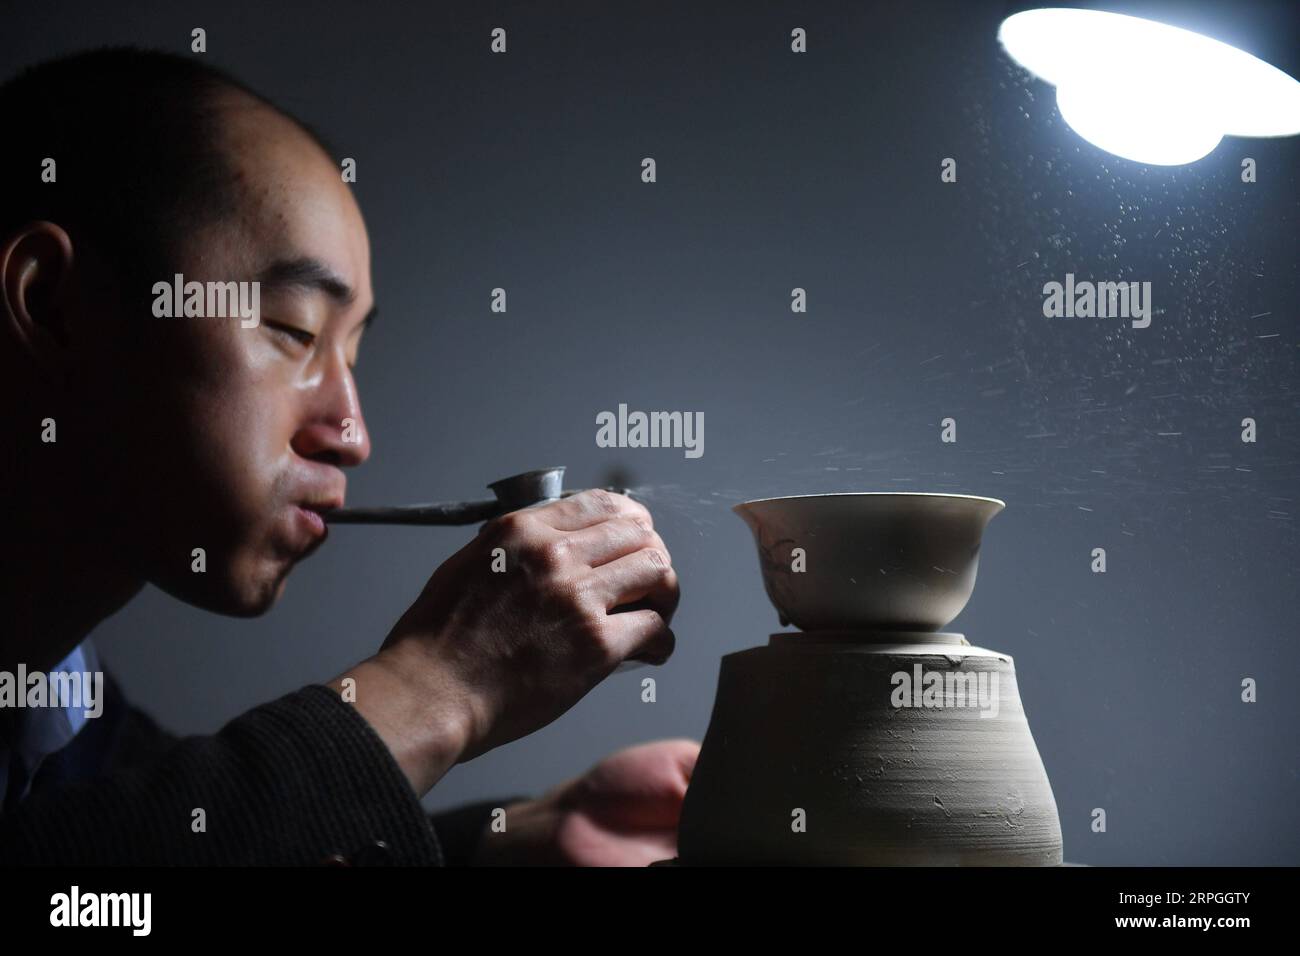 191016 -- NANCHANG, Oct. 16, 2019 -- A member of the team Kuaixueshiqing blows glaze to make porcelain works in Jingdezhen, east China s Jiangxi Province, Oct. 15, 2019. Egg shell porcelain, a renowned kind of traditional porcelain work produced in Jingdezhen of Jiangxi, is famous for its thin and transparent body which makes it special. Wang Minhui, 40, is head of the egg shell porcelain making team called Kuaixueshiqing . Wang and his two partners Du Xingyu and Liu Zhen, who take interest in porcelain, founded the team in 2010. The team, now having over 20 members, has insisted in striving f Stock Photo